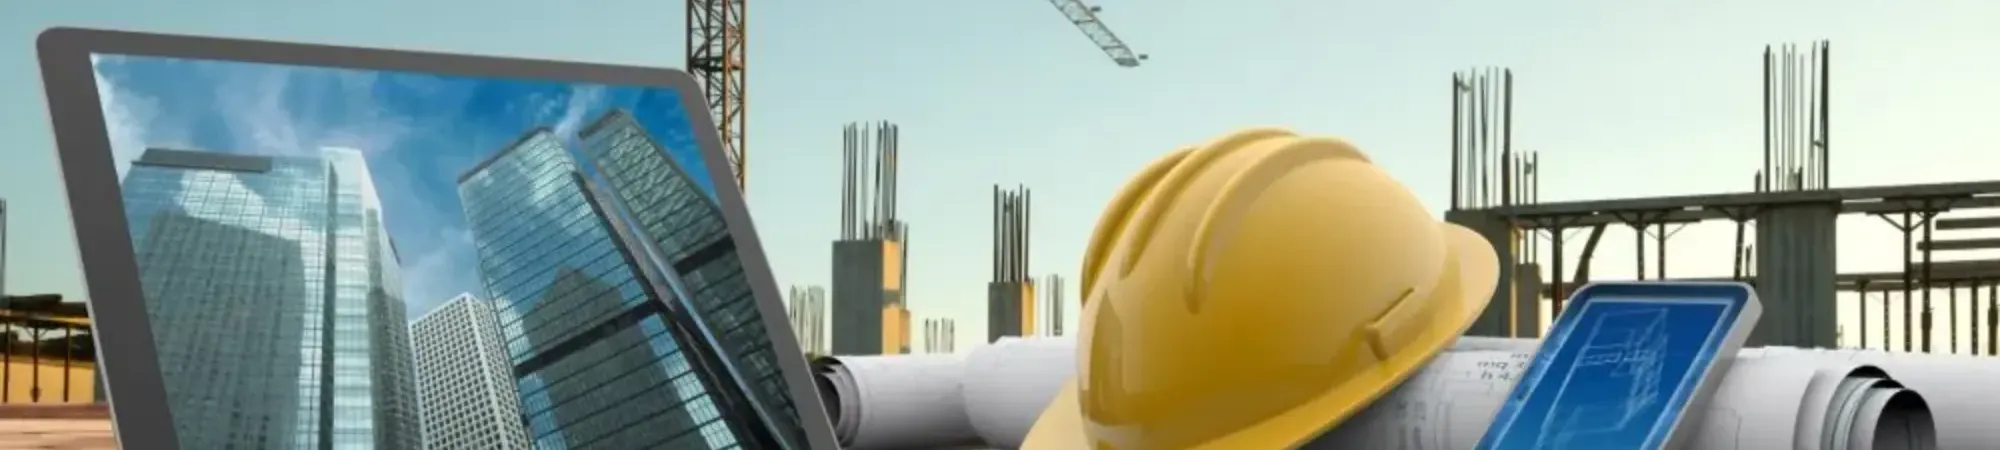 Image of yellow hard hat and laptop on construction site